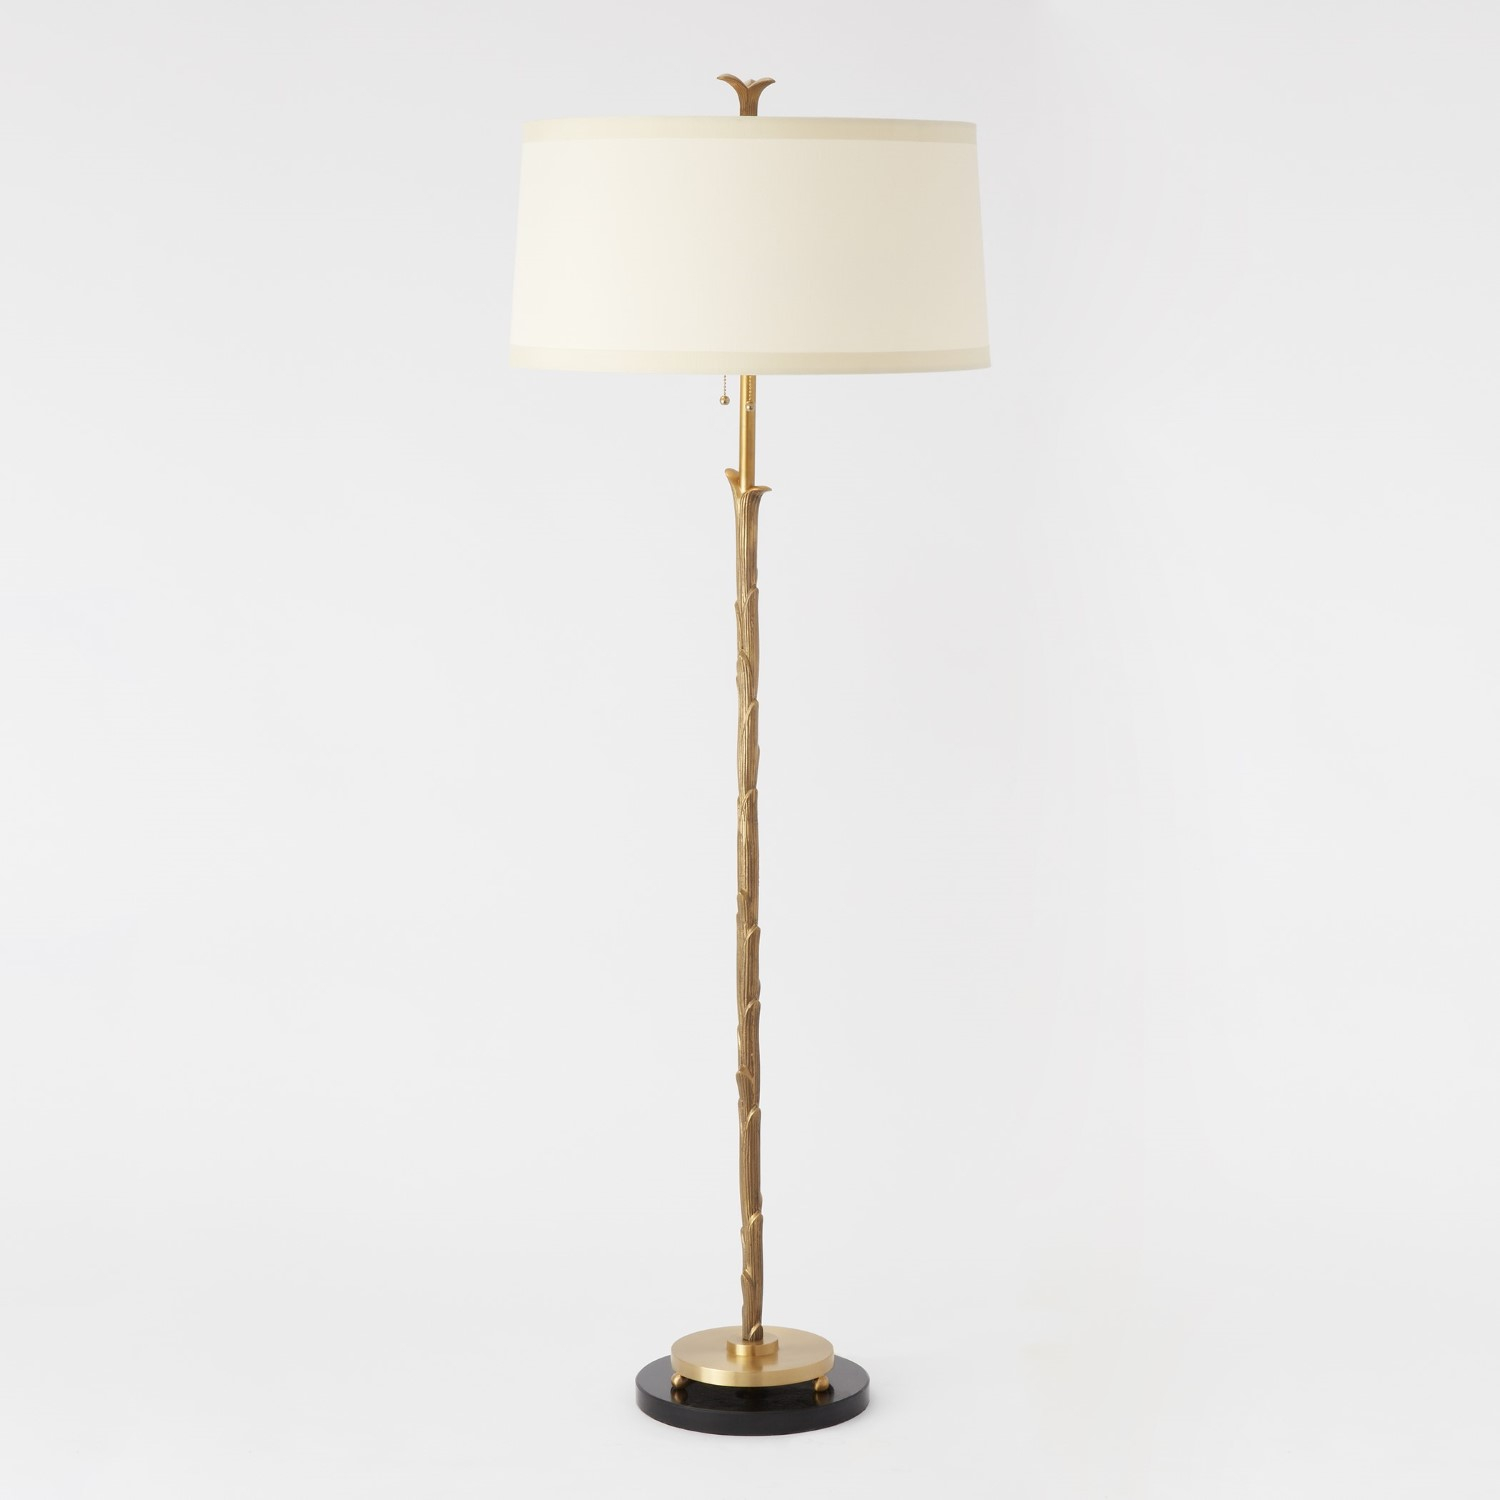 Organic Floor Lamp Antique Brass Finish intended for dimensions 1500 X 1500